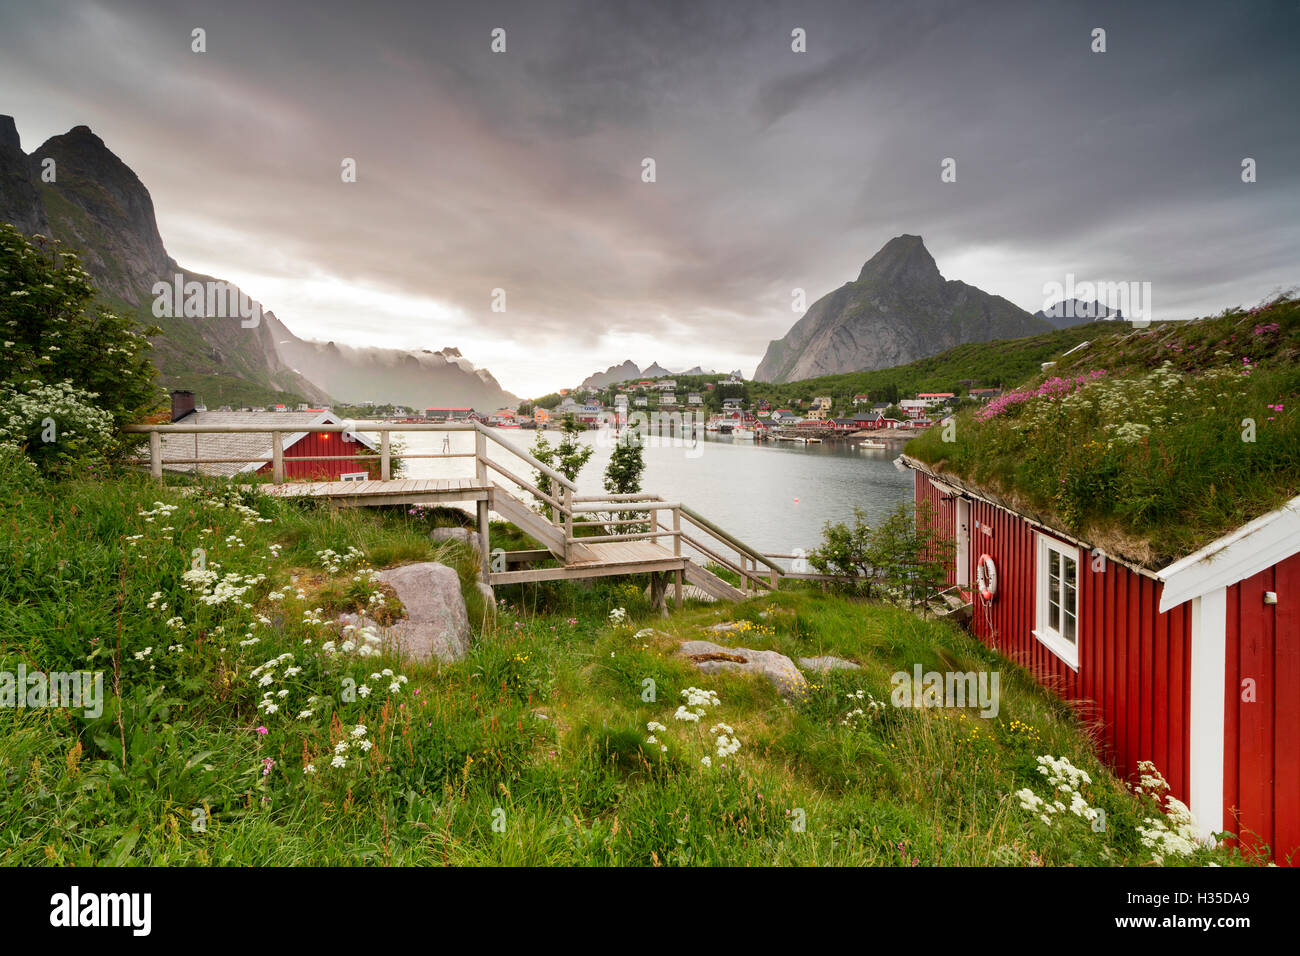 Green grass and flowers frame the typical Rorbu surrounded by sea, Reine, Nordland county, Lofoten Islands, Arctic, Norway Stock Photo